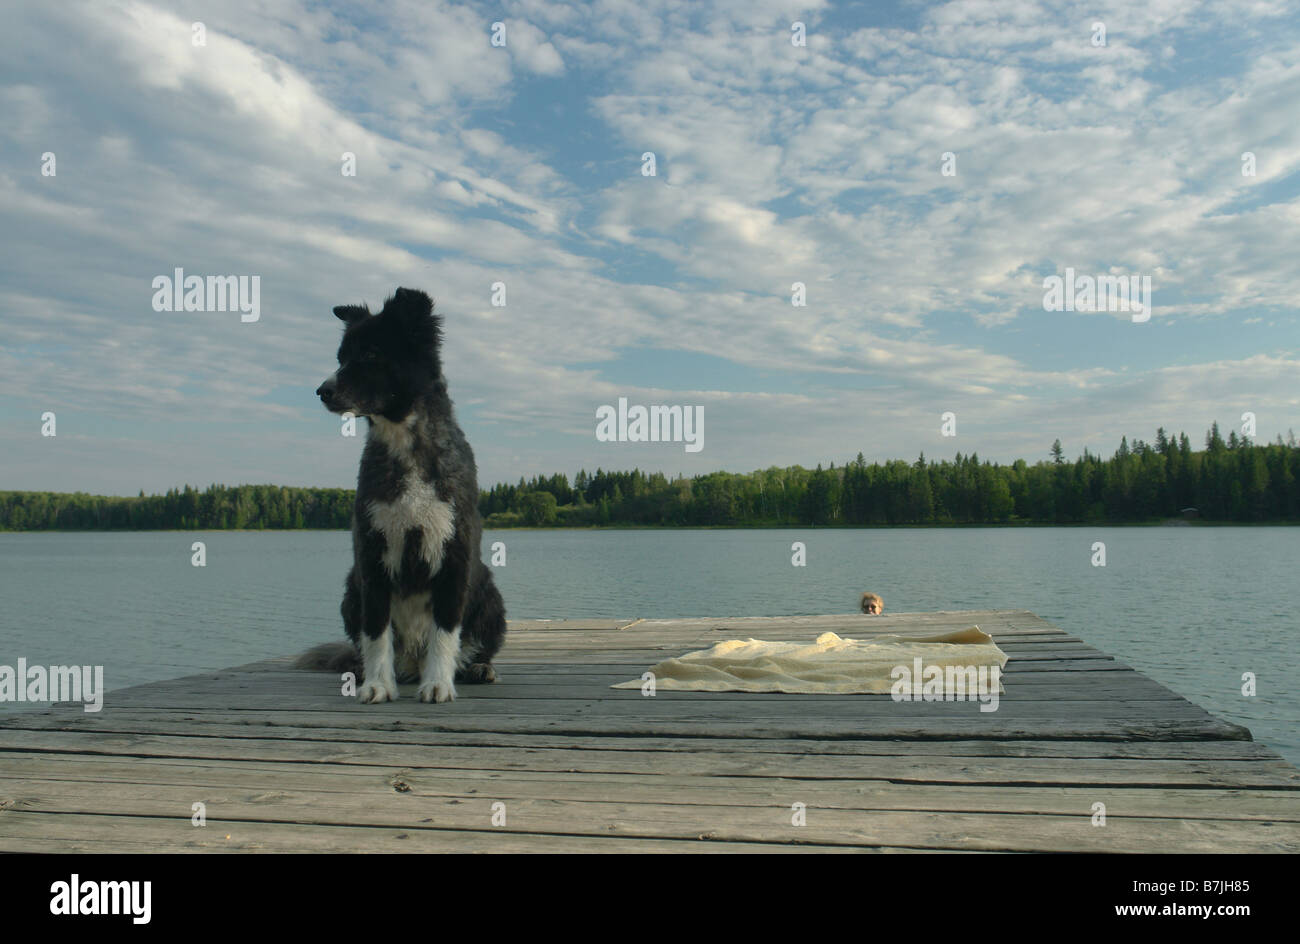 Dog in foreground with 45 year old woman swimming in Katherine L. No motor boats allowed.; Canada, Manitoba Stock Photo